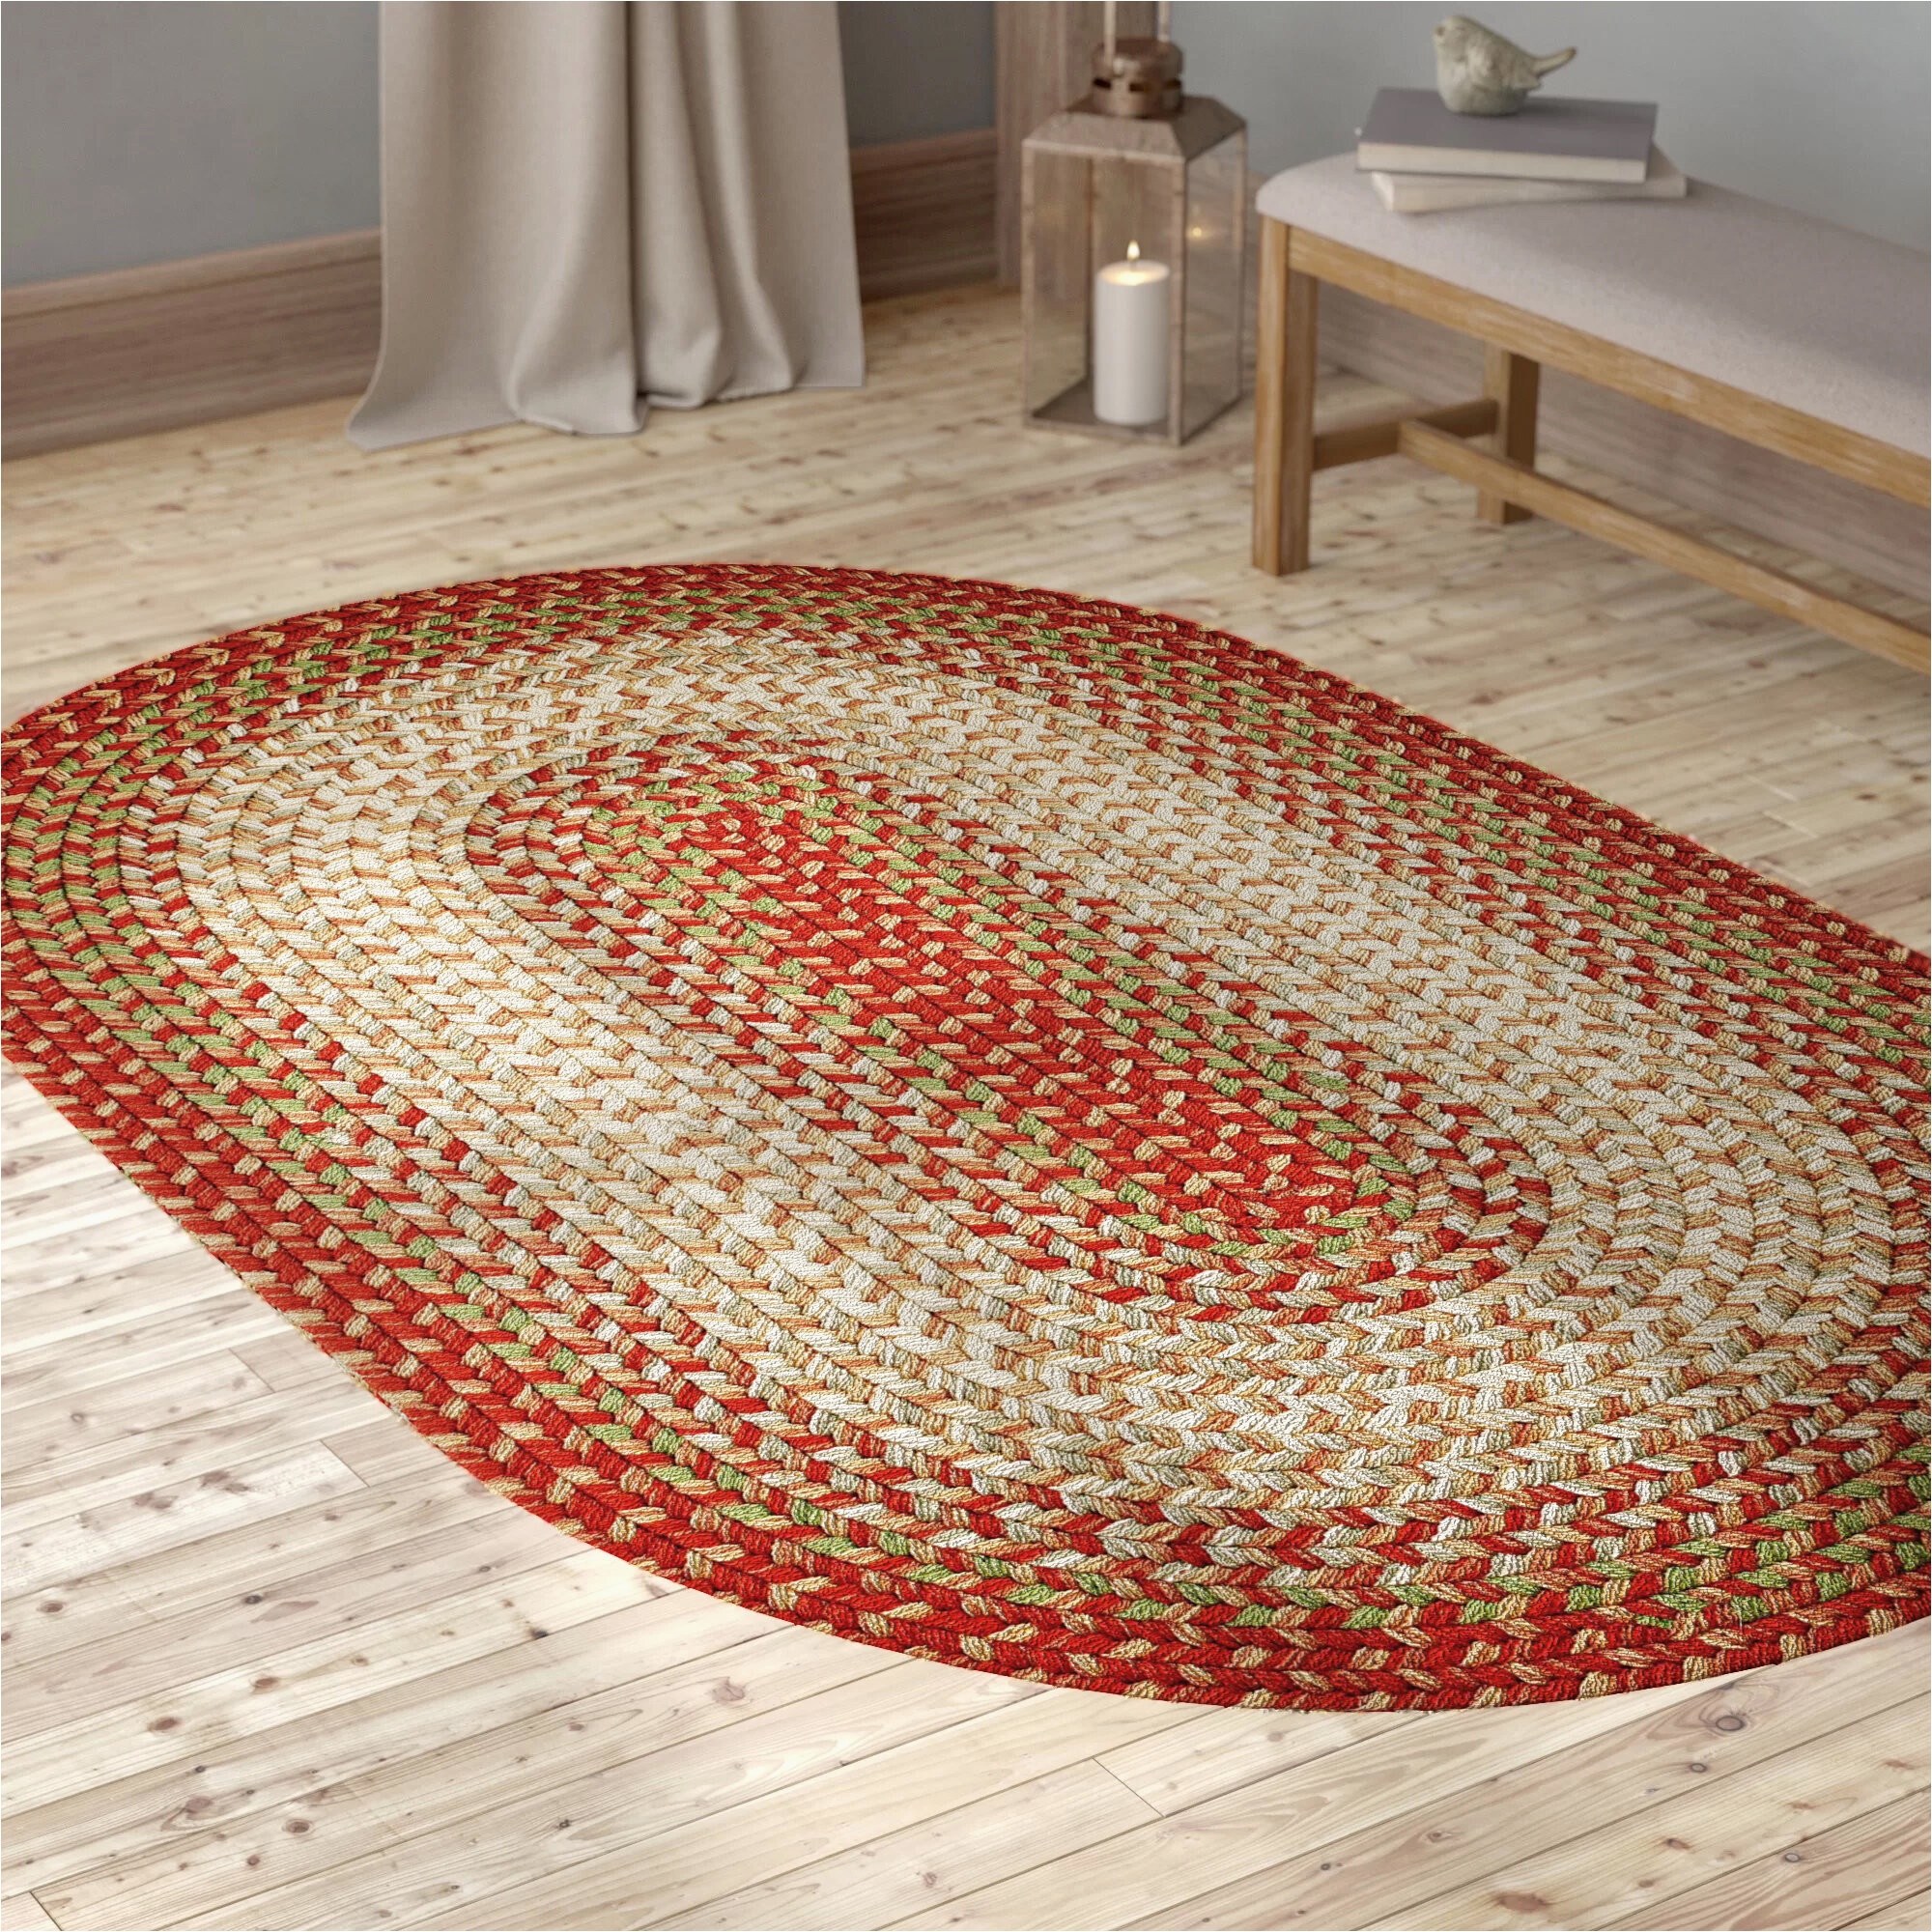 Large Oval Braided area Rugs Wayfair Braided area Rugs You’ll Love In 2021